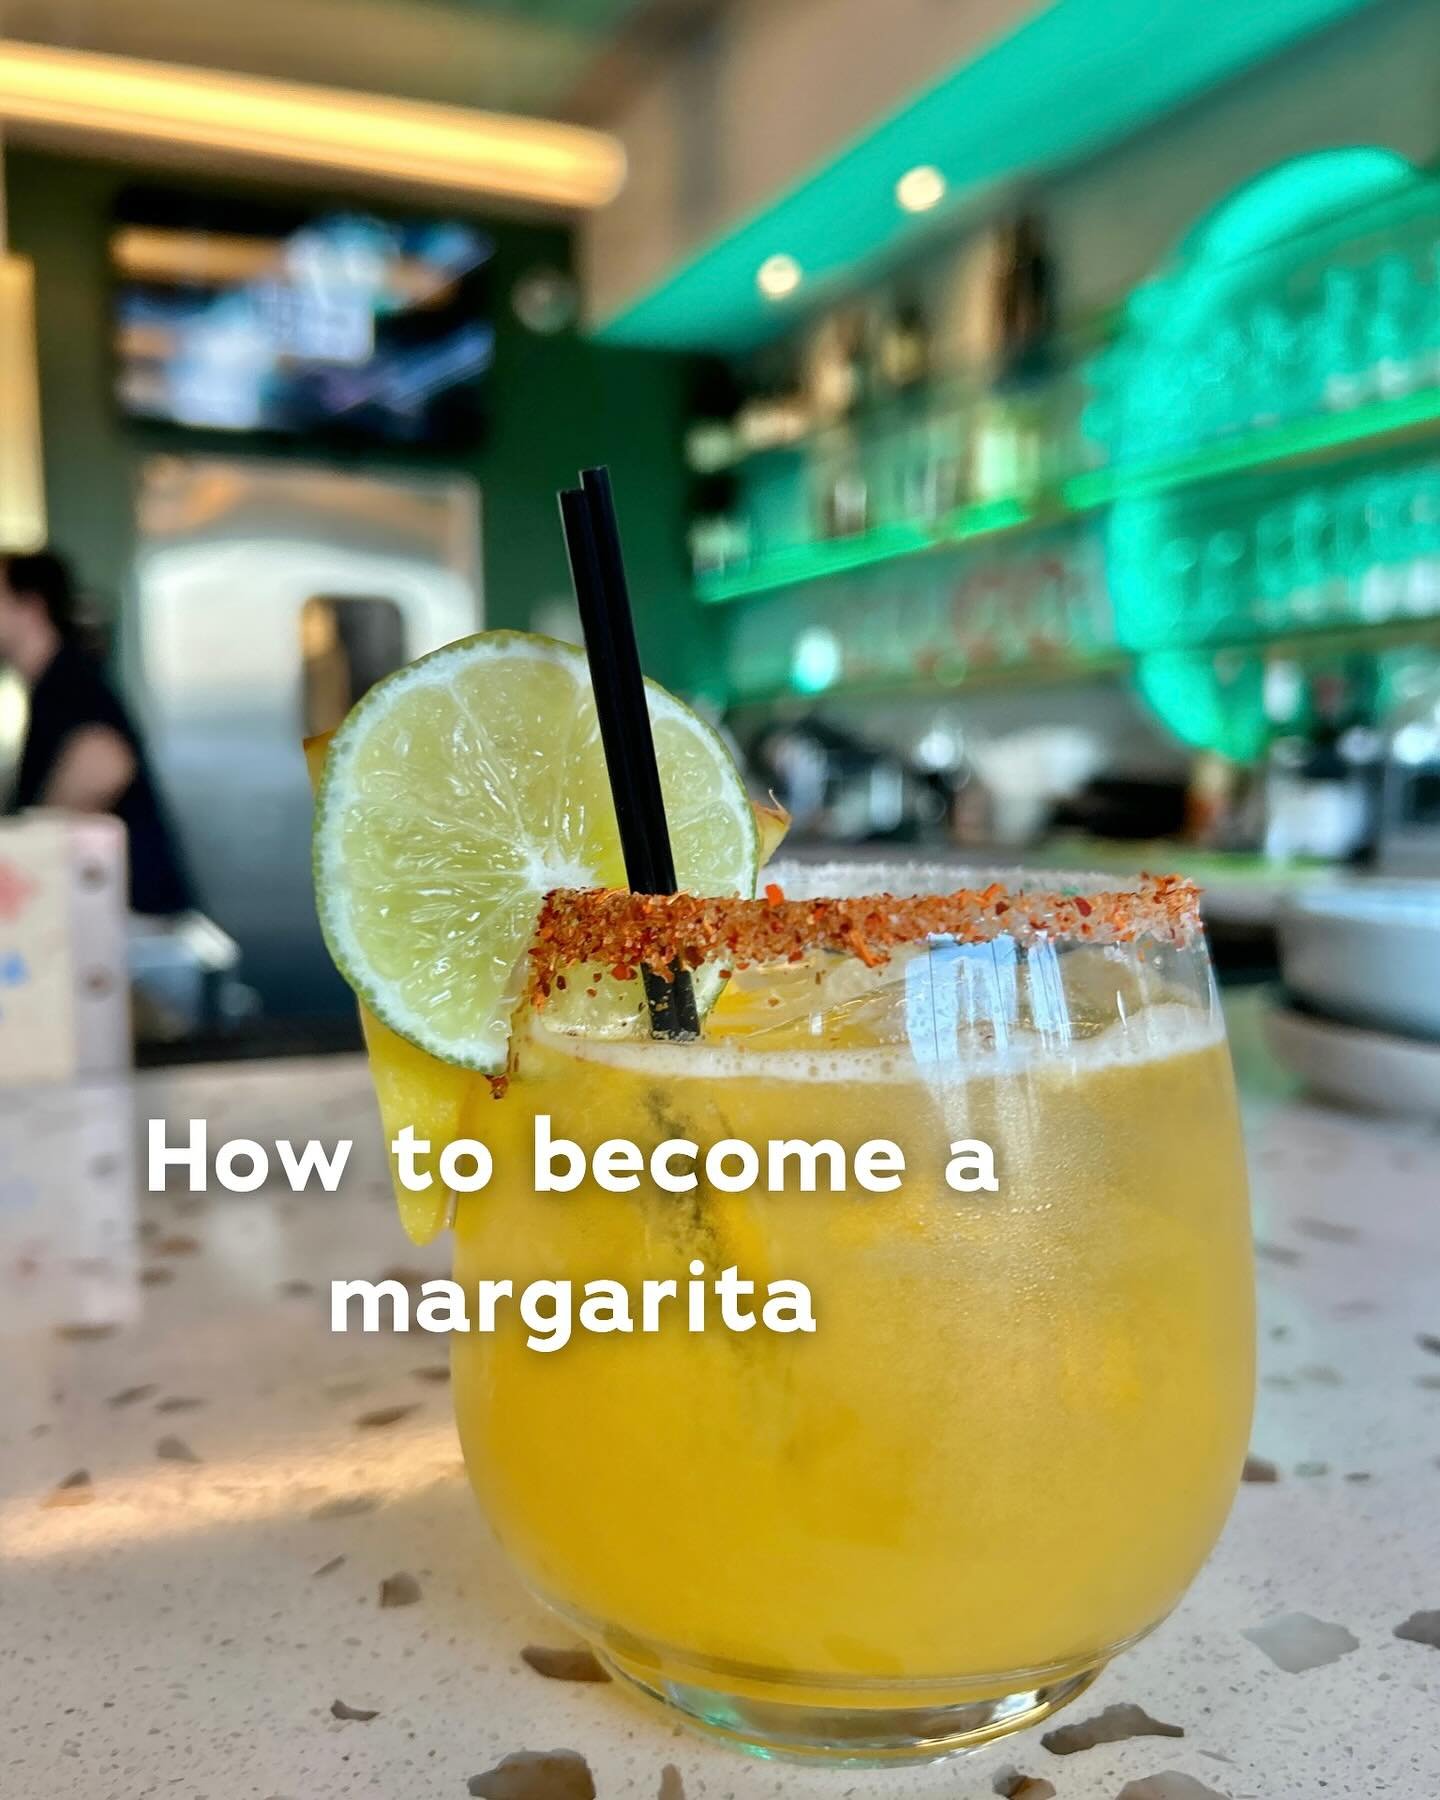 How to become a margarita 🍹&hellip; 🤷&zwj;♀️
.
.
#palmsprings #visitpalmsprings #dinegps #crudopalmsprings #margaritas #cocktails #happyhour #visitgreaterpalmsprings